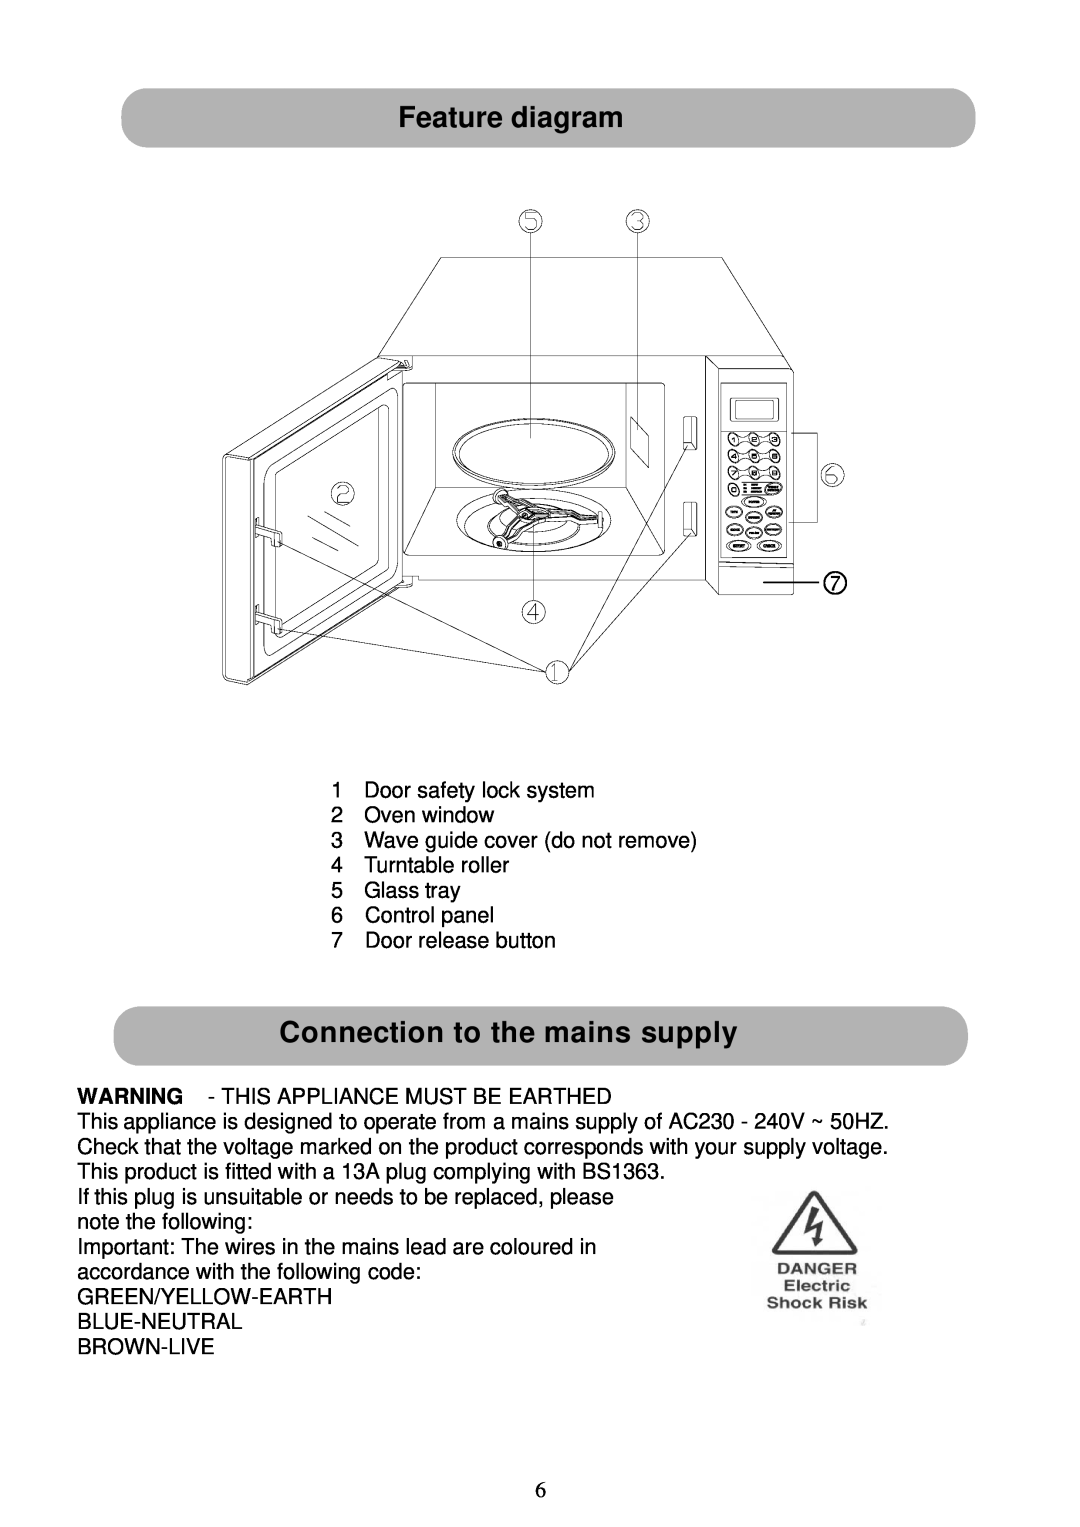 Russell Hobbs RHM1719B user manual Feature diagram, Connection to the mains supply 